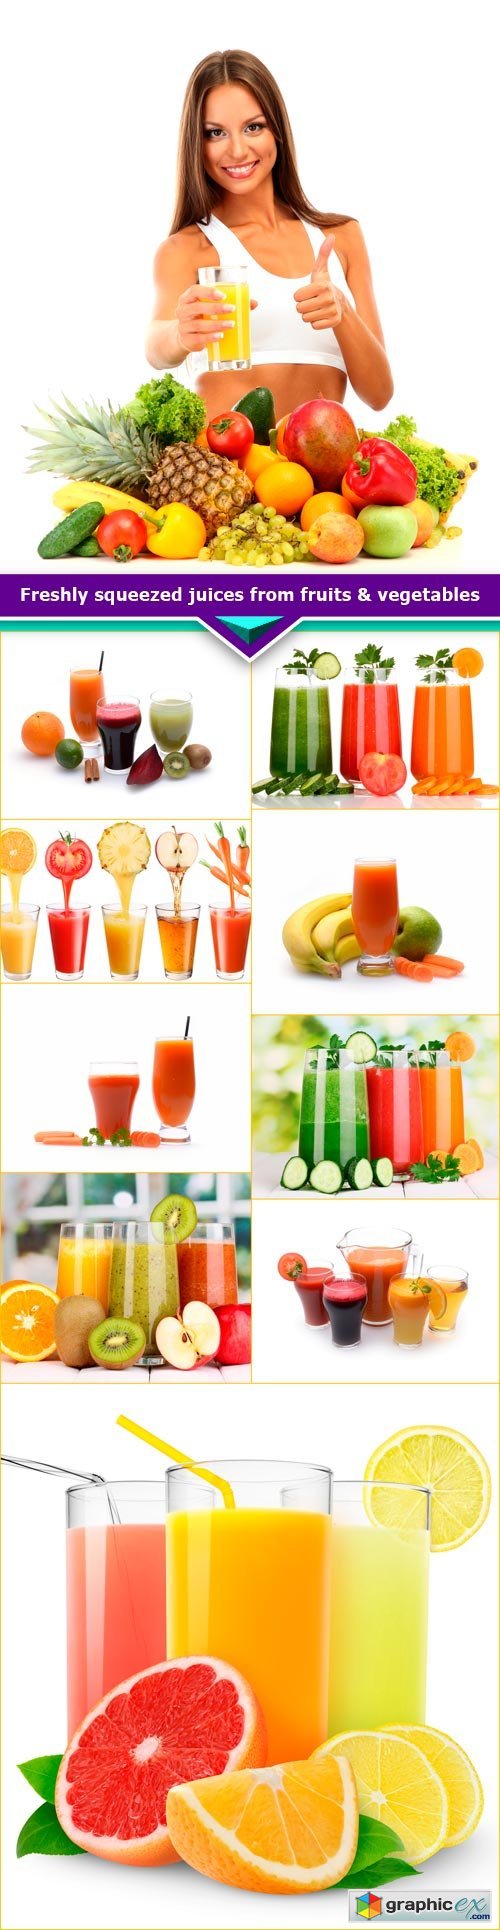 Freshly squeezed juices from fruits & vegetables 10x JPEG